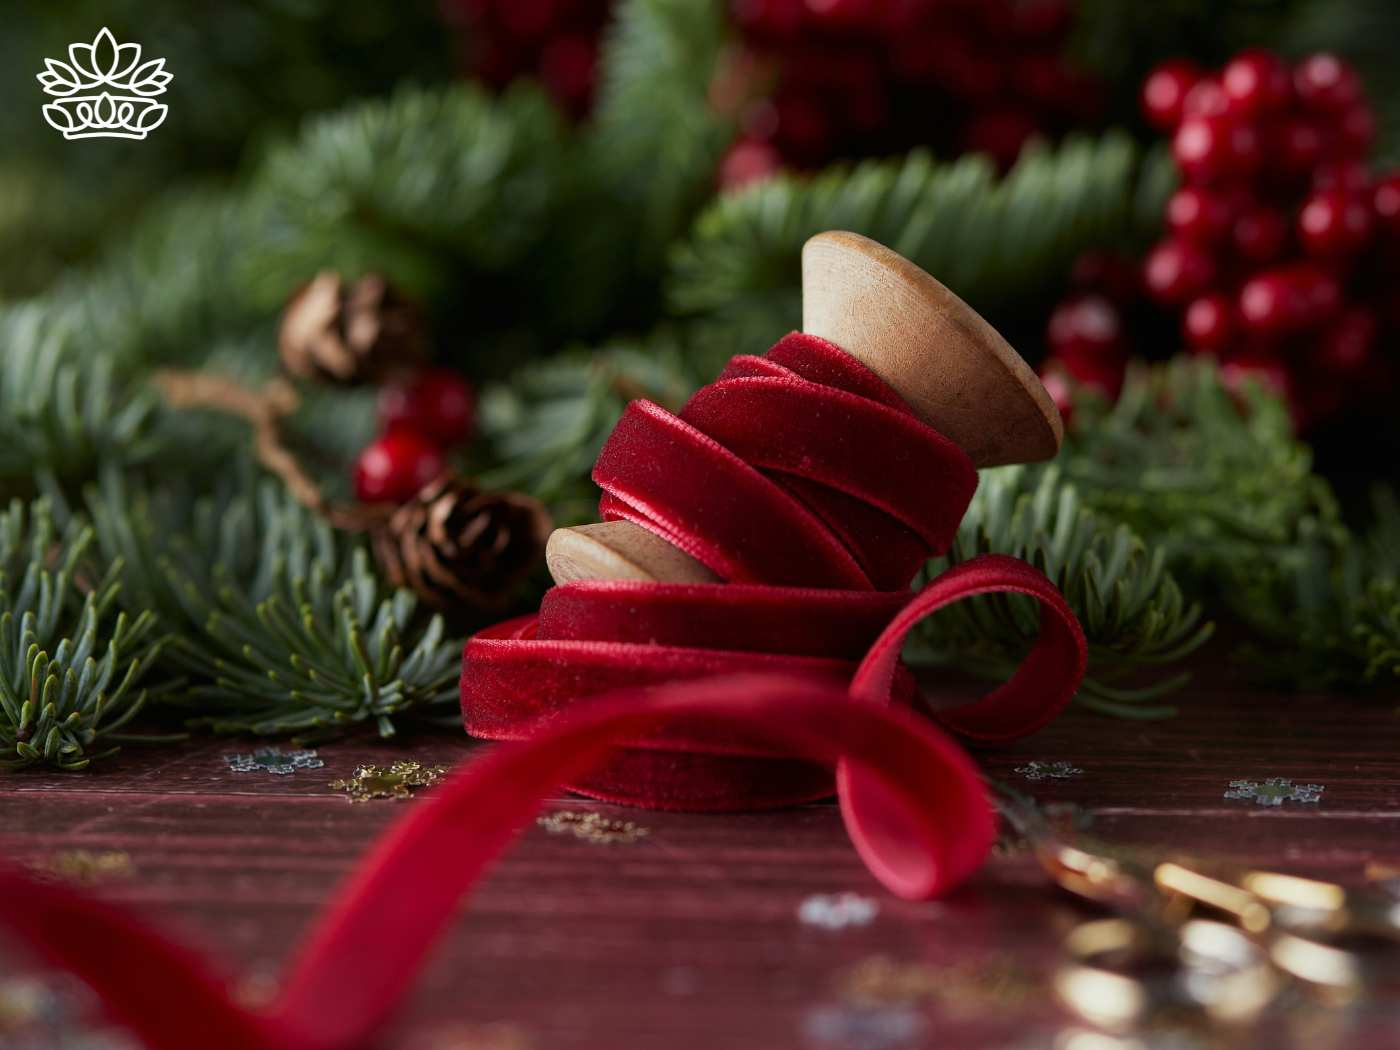 A wooden spool wrapped in a luxurious red velvet ribbon, set against a festive backdrop of evergreen branches and holly berries, encapsulating the essence of the Christmas season, part of the decorative collection at Fabulous Flowers and Gifts.